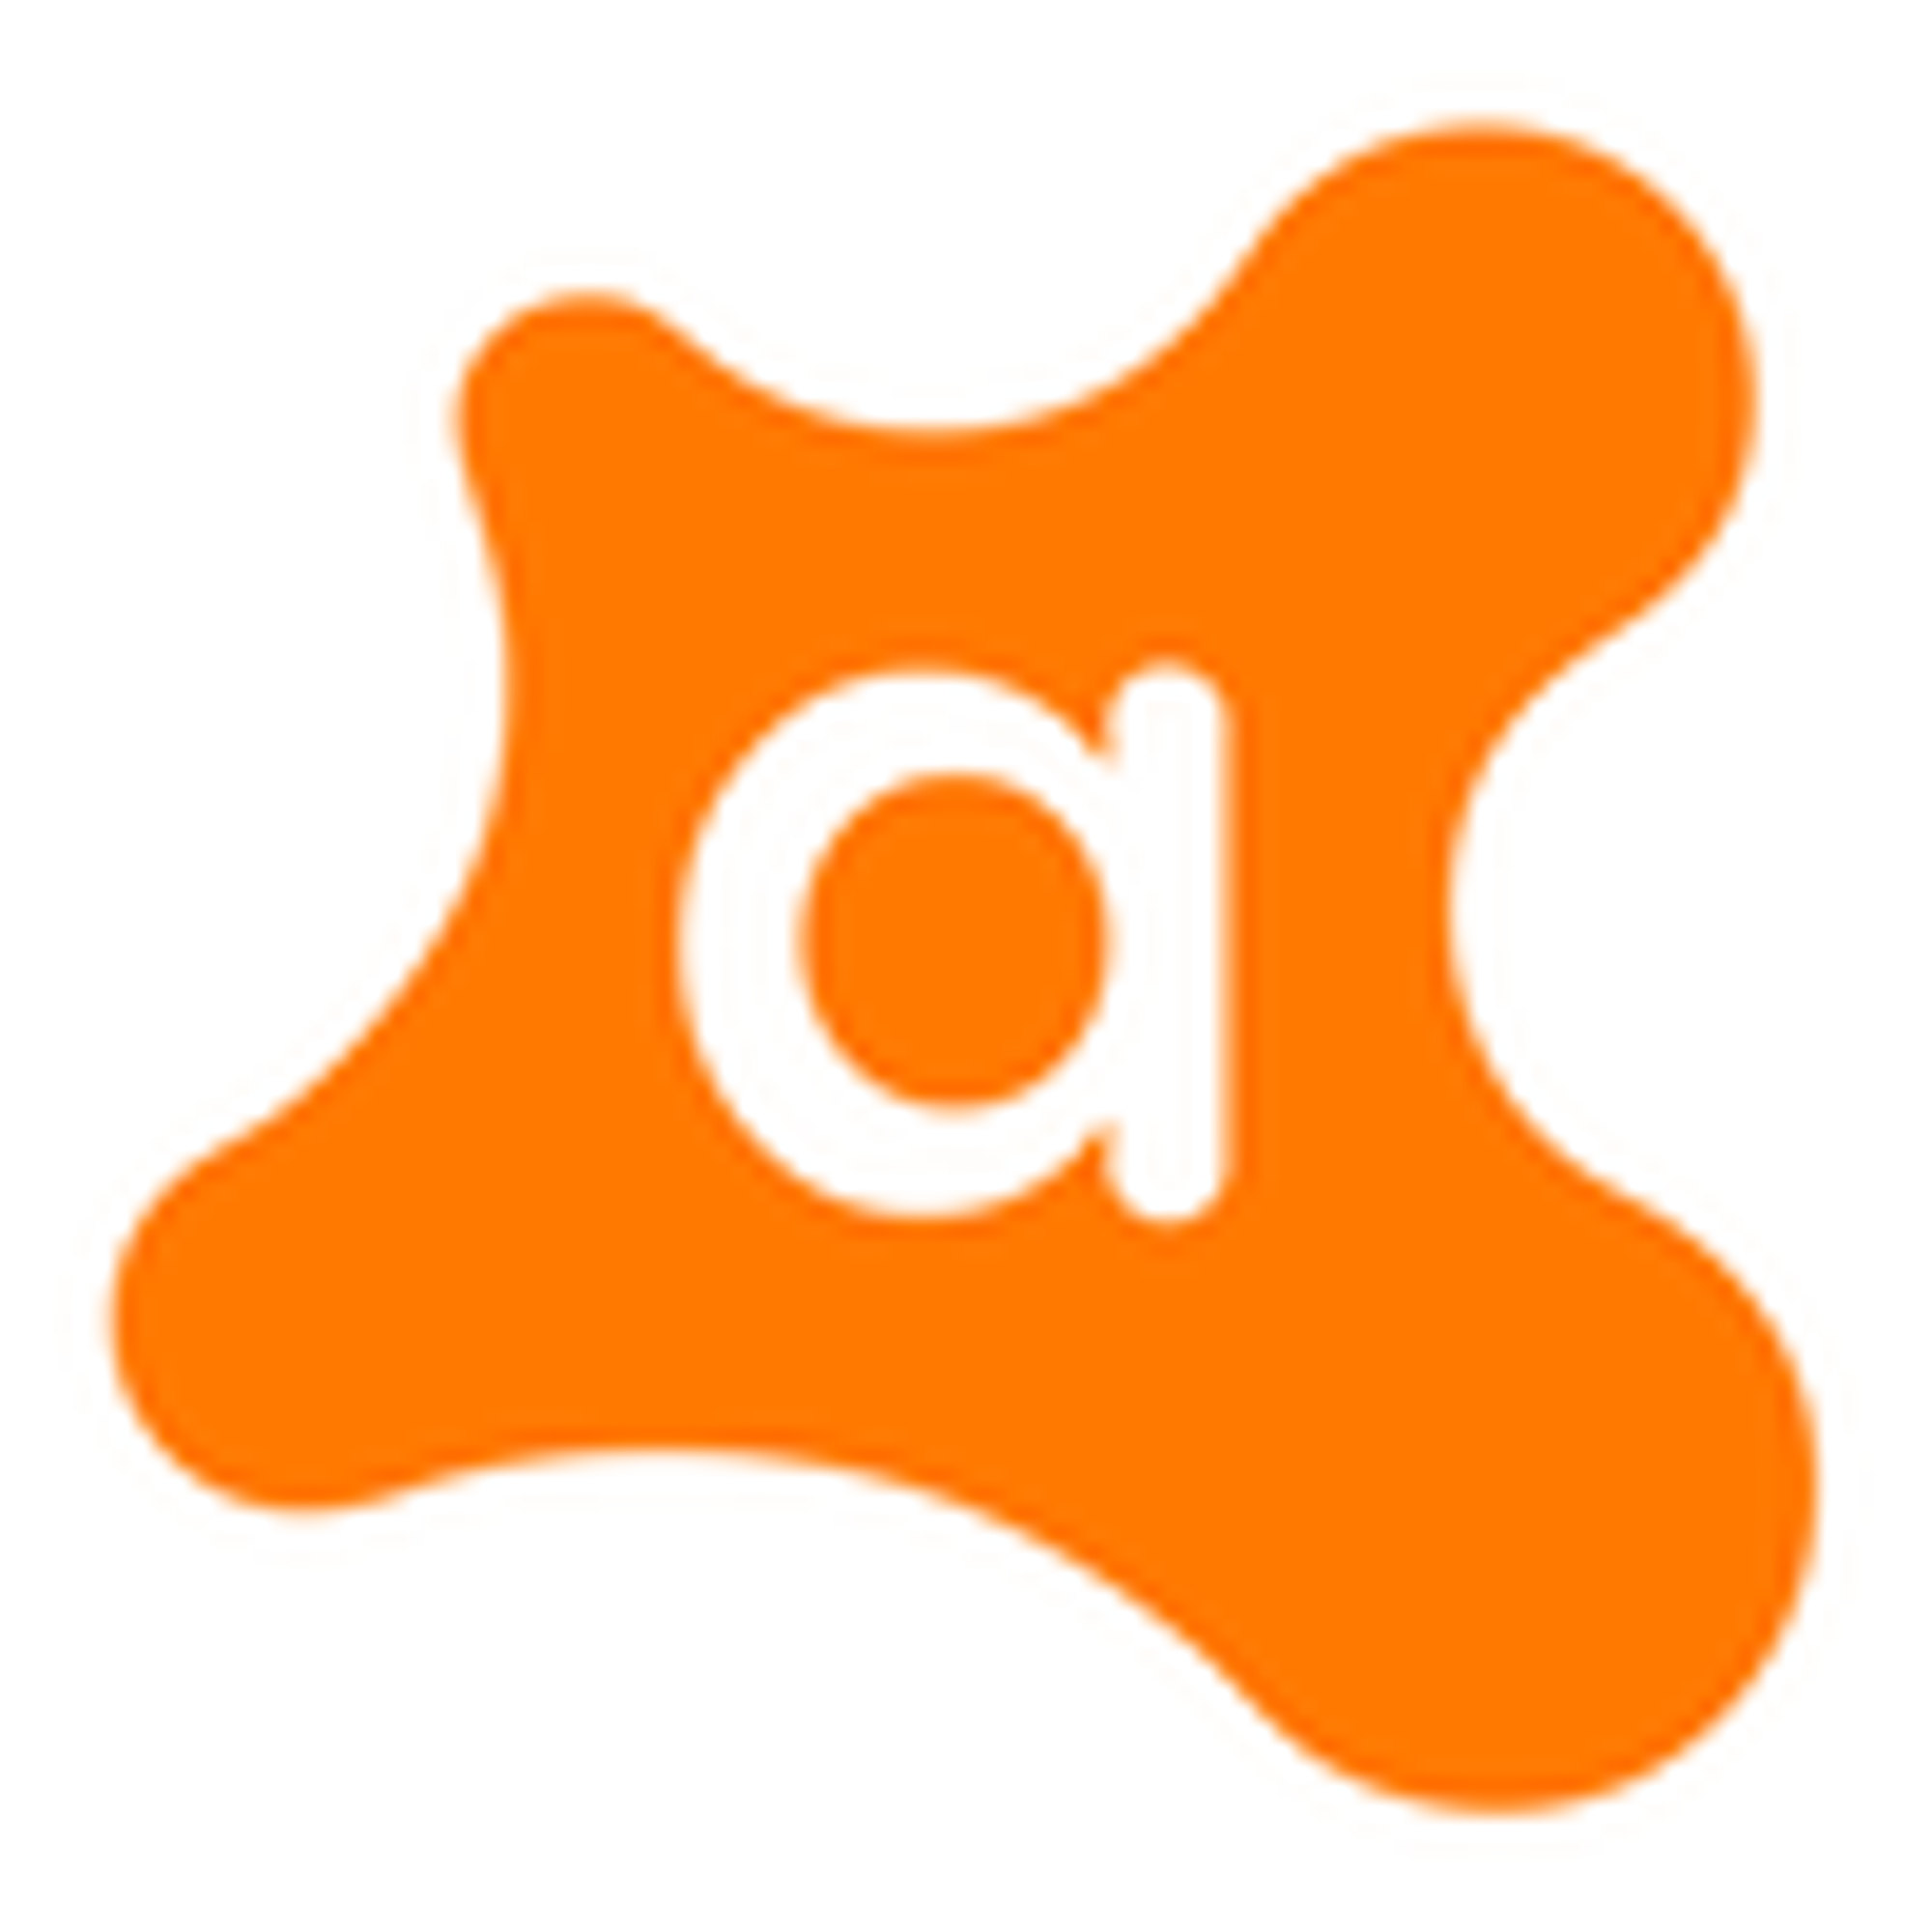 Avast (Computer and Network Security)